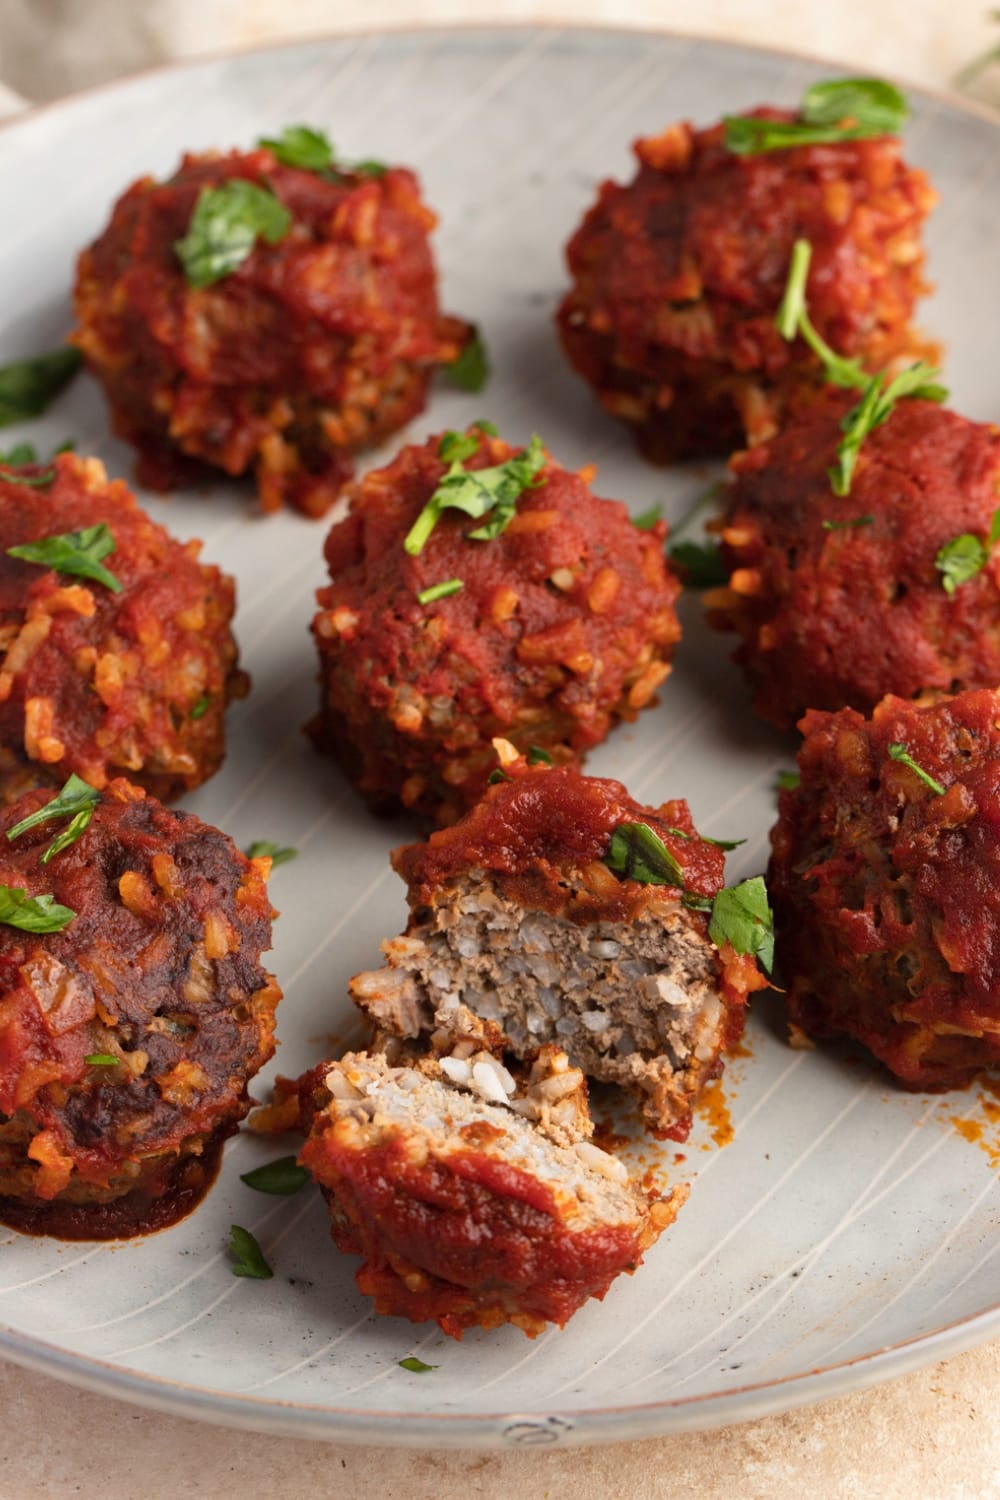 Homemade Saucy Porcupine Meatballs with Herbs